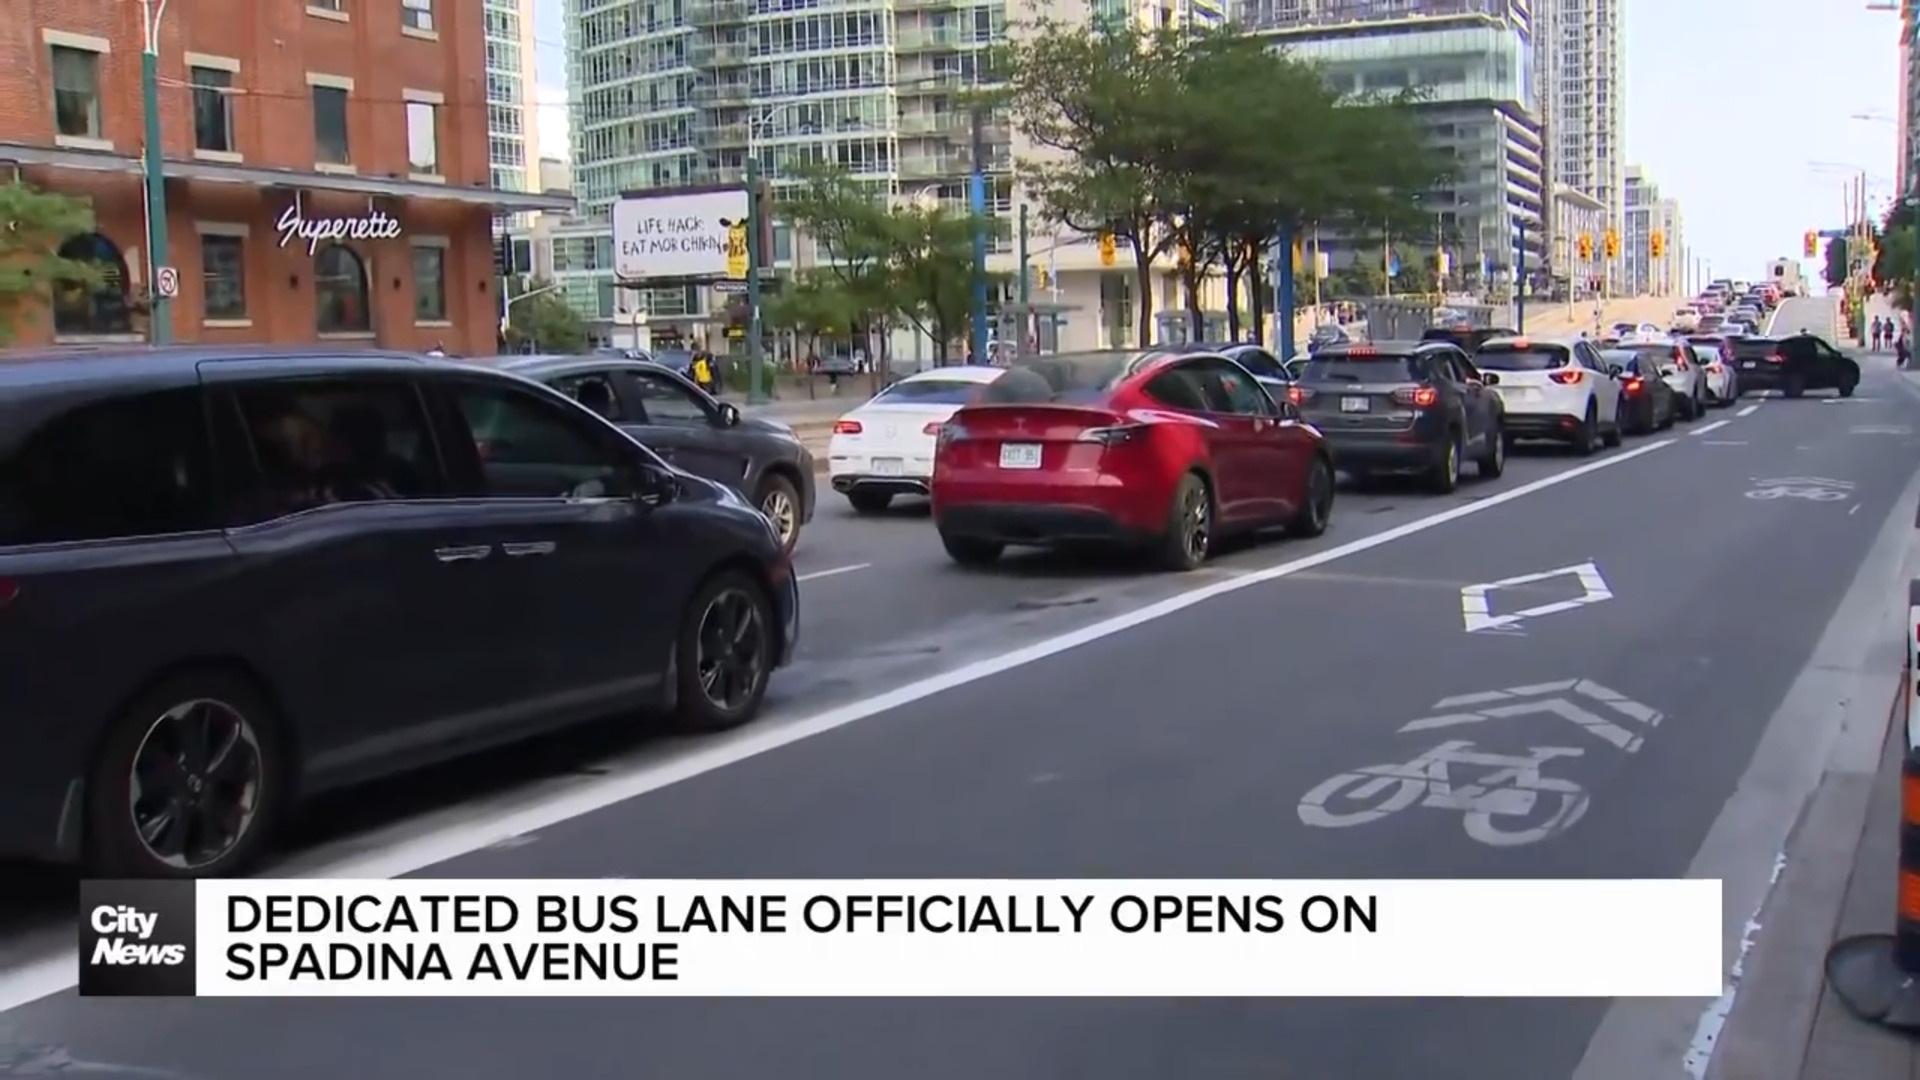 Dedicated bus lane now in service on Spadina Avenue